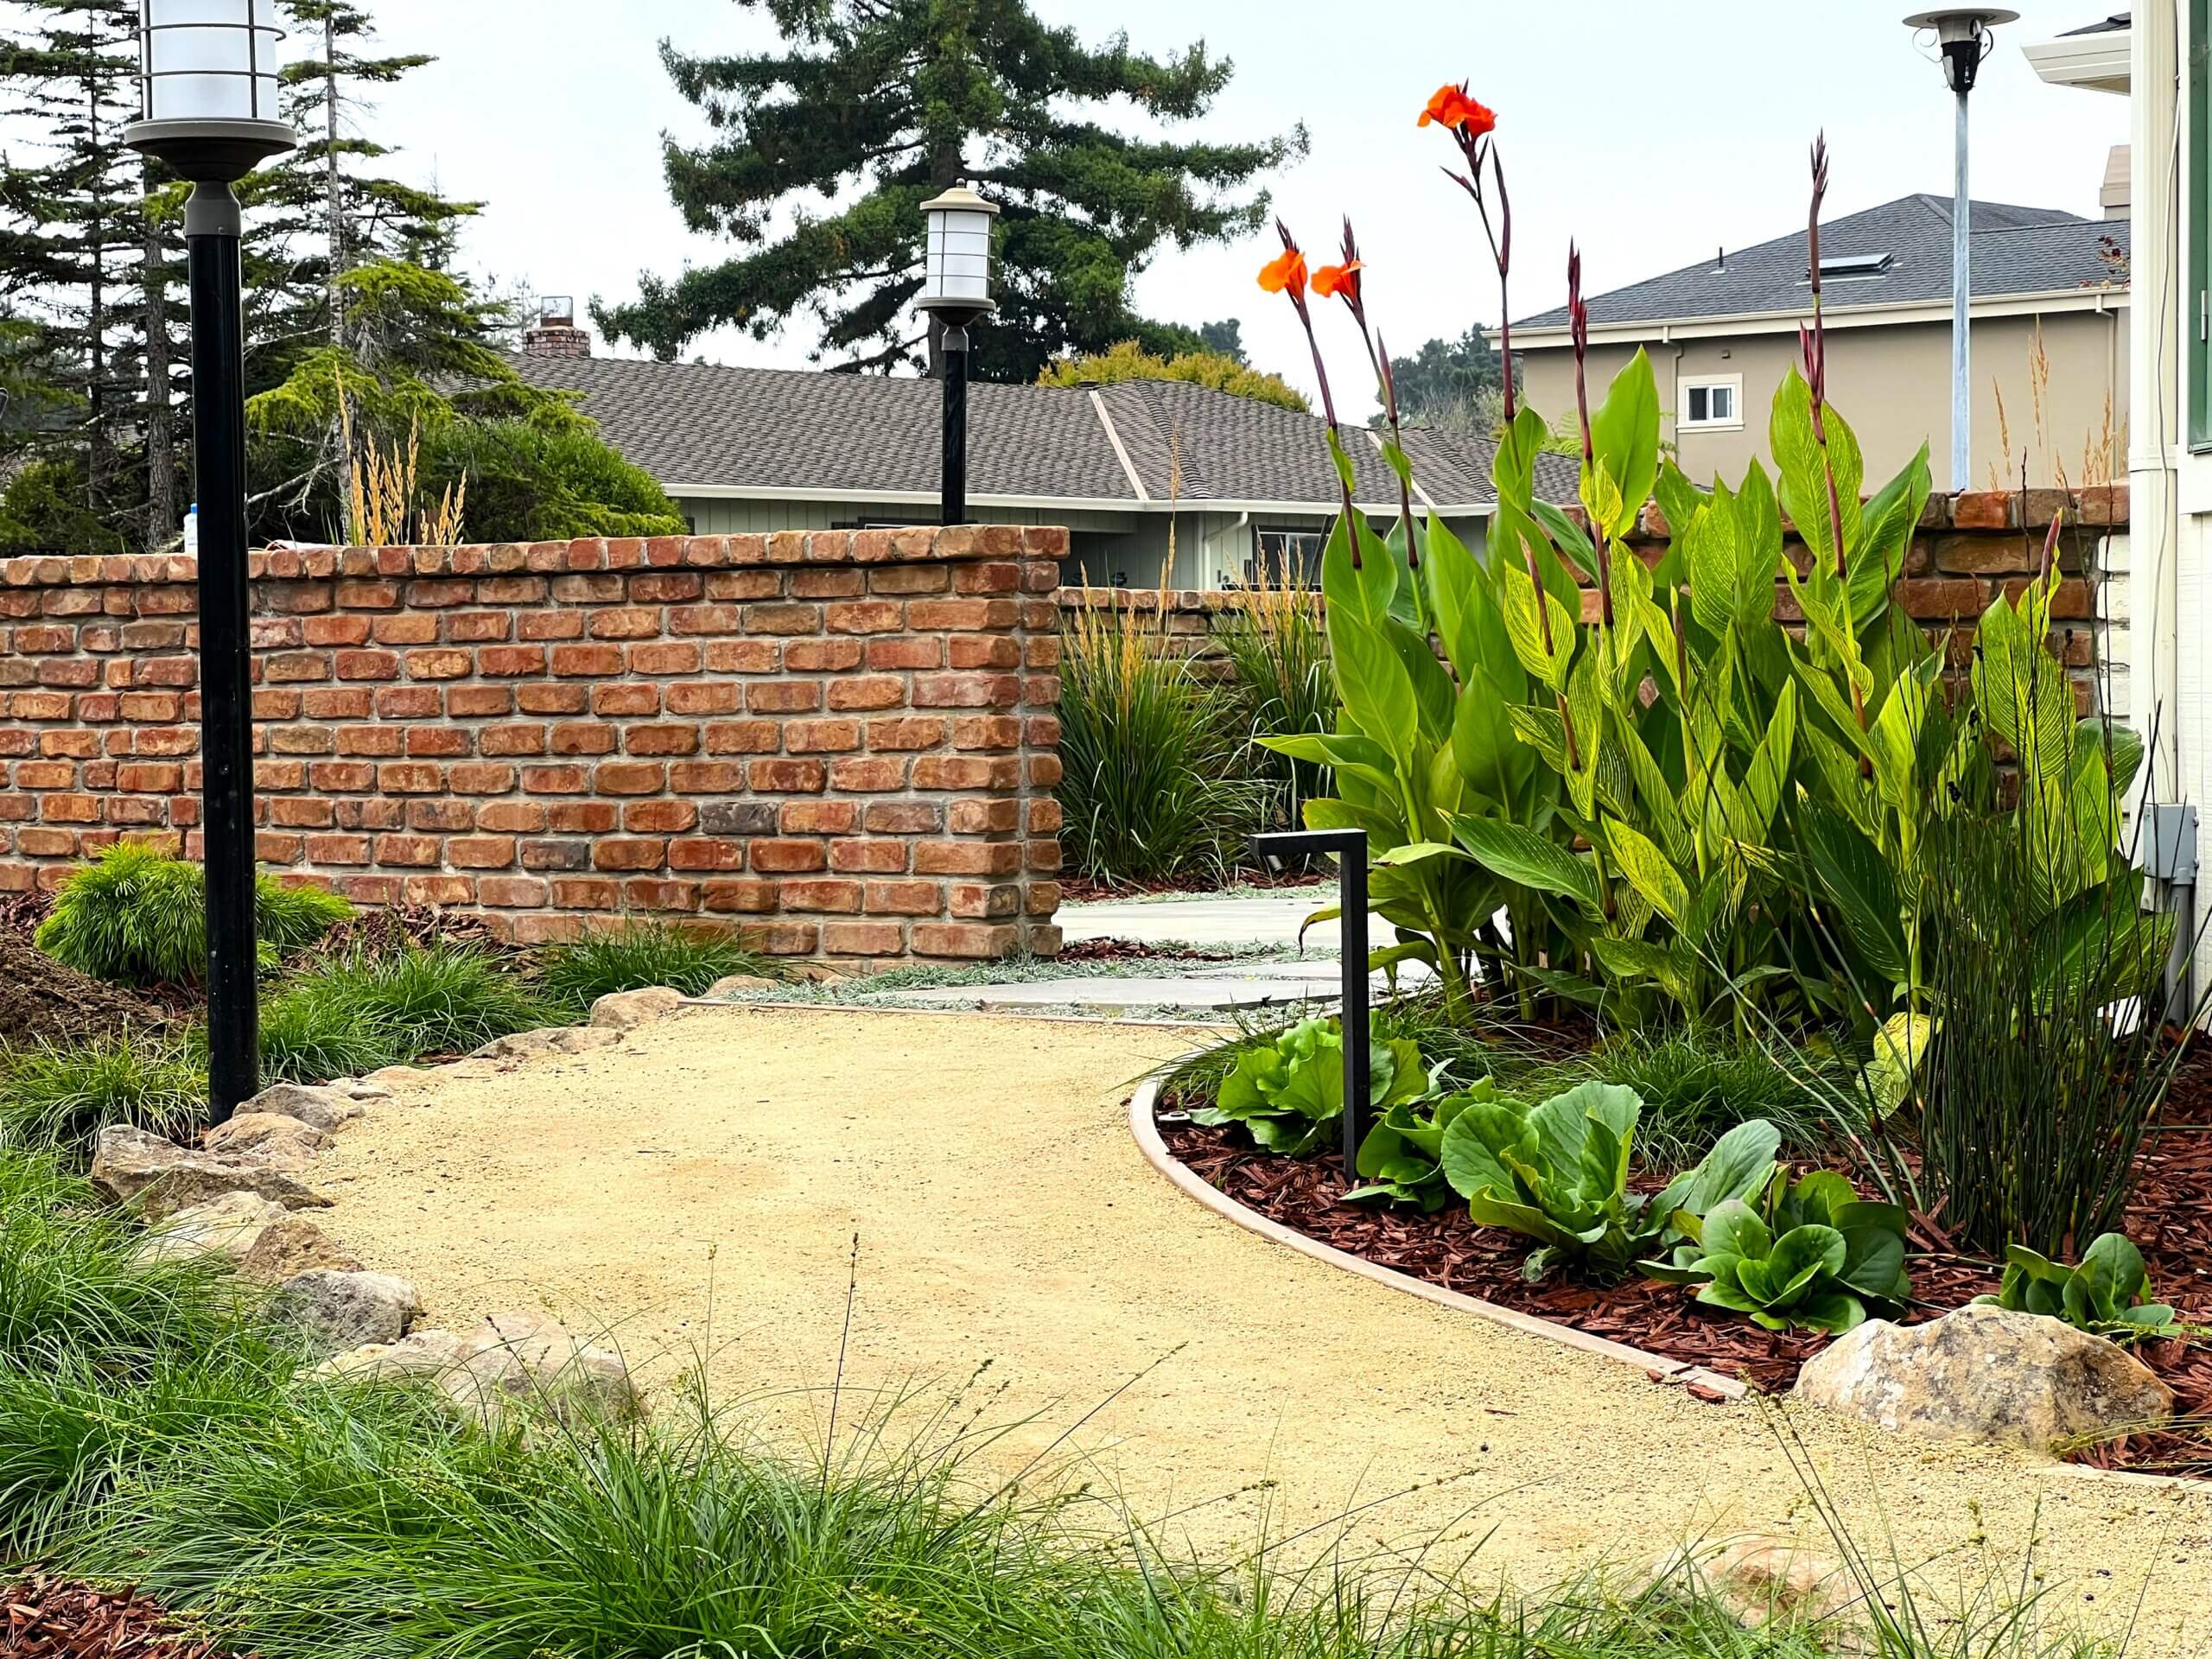 Sand and gravel walkway leading to brick fenced courtyard with ground cover plantings